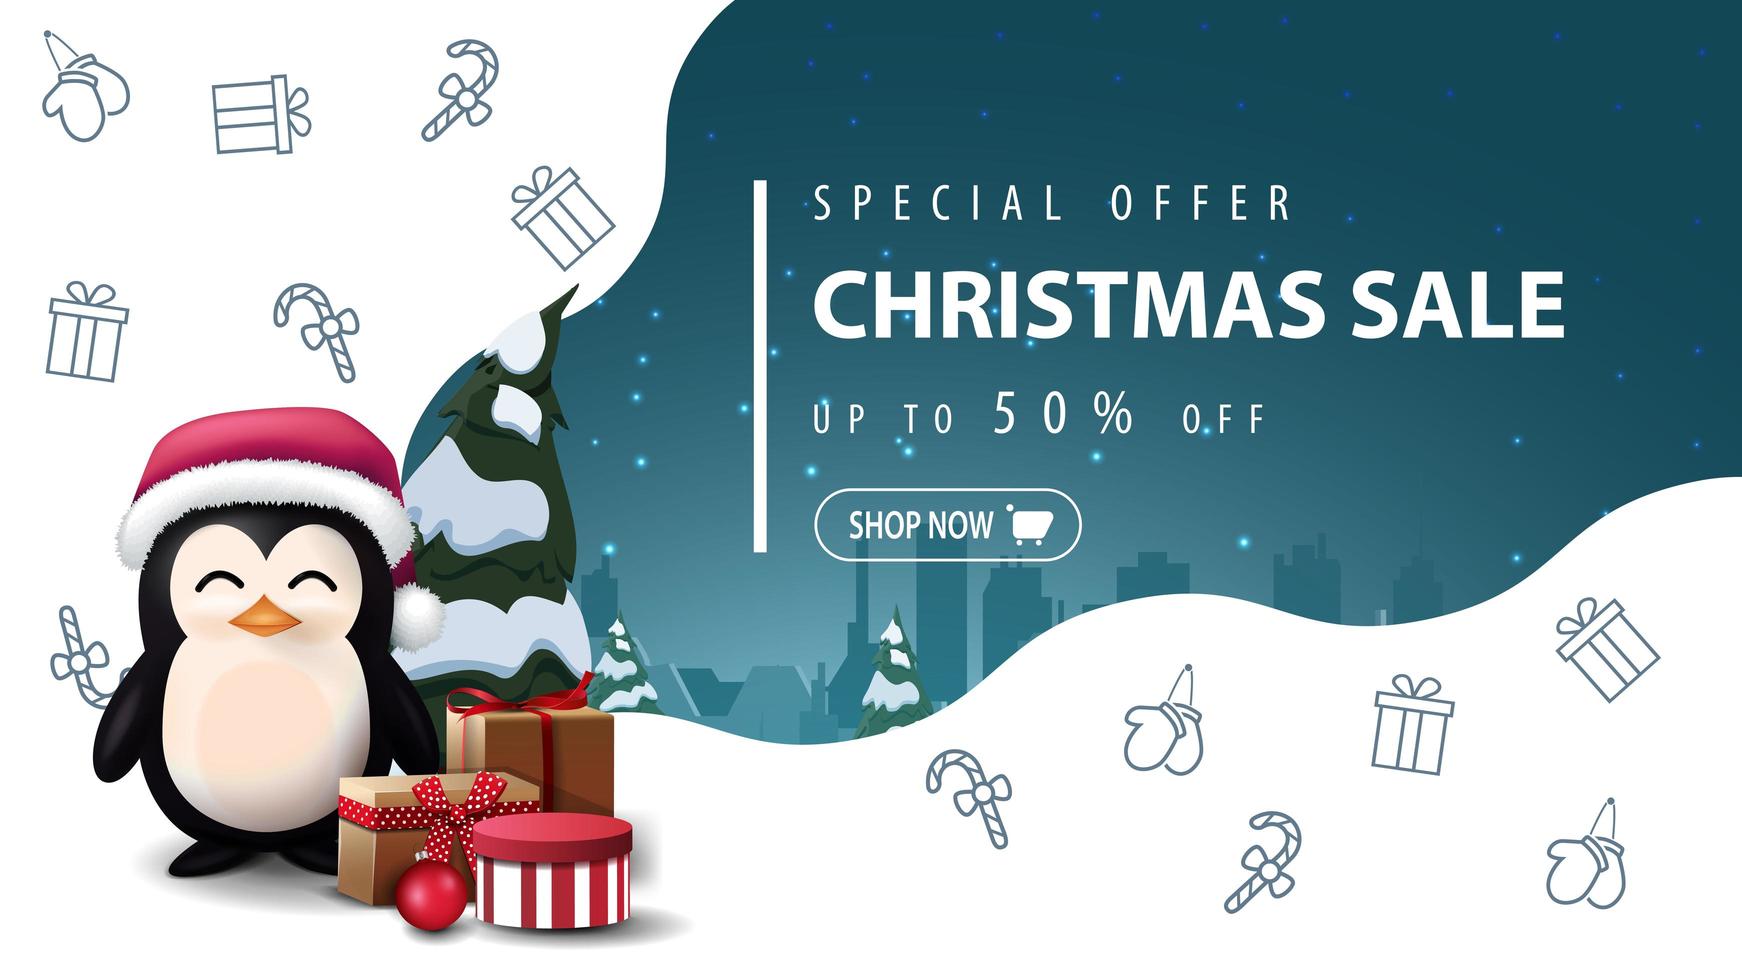 Special offer, Christmas sale, up to 50 off, beautiful white and blue discount banner with penguin in Santa Claus hat with presents and Christmas line icons, space imagination vector